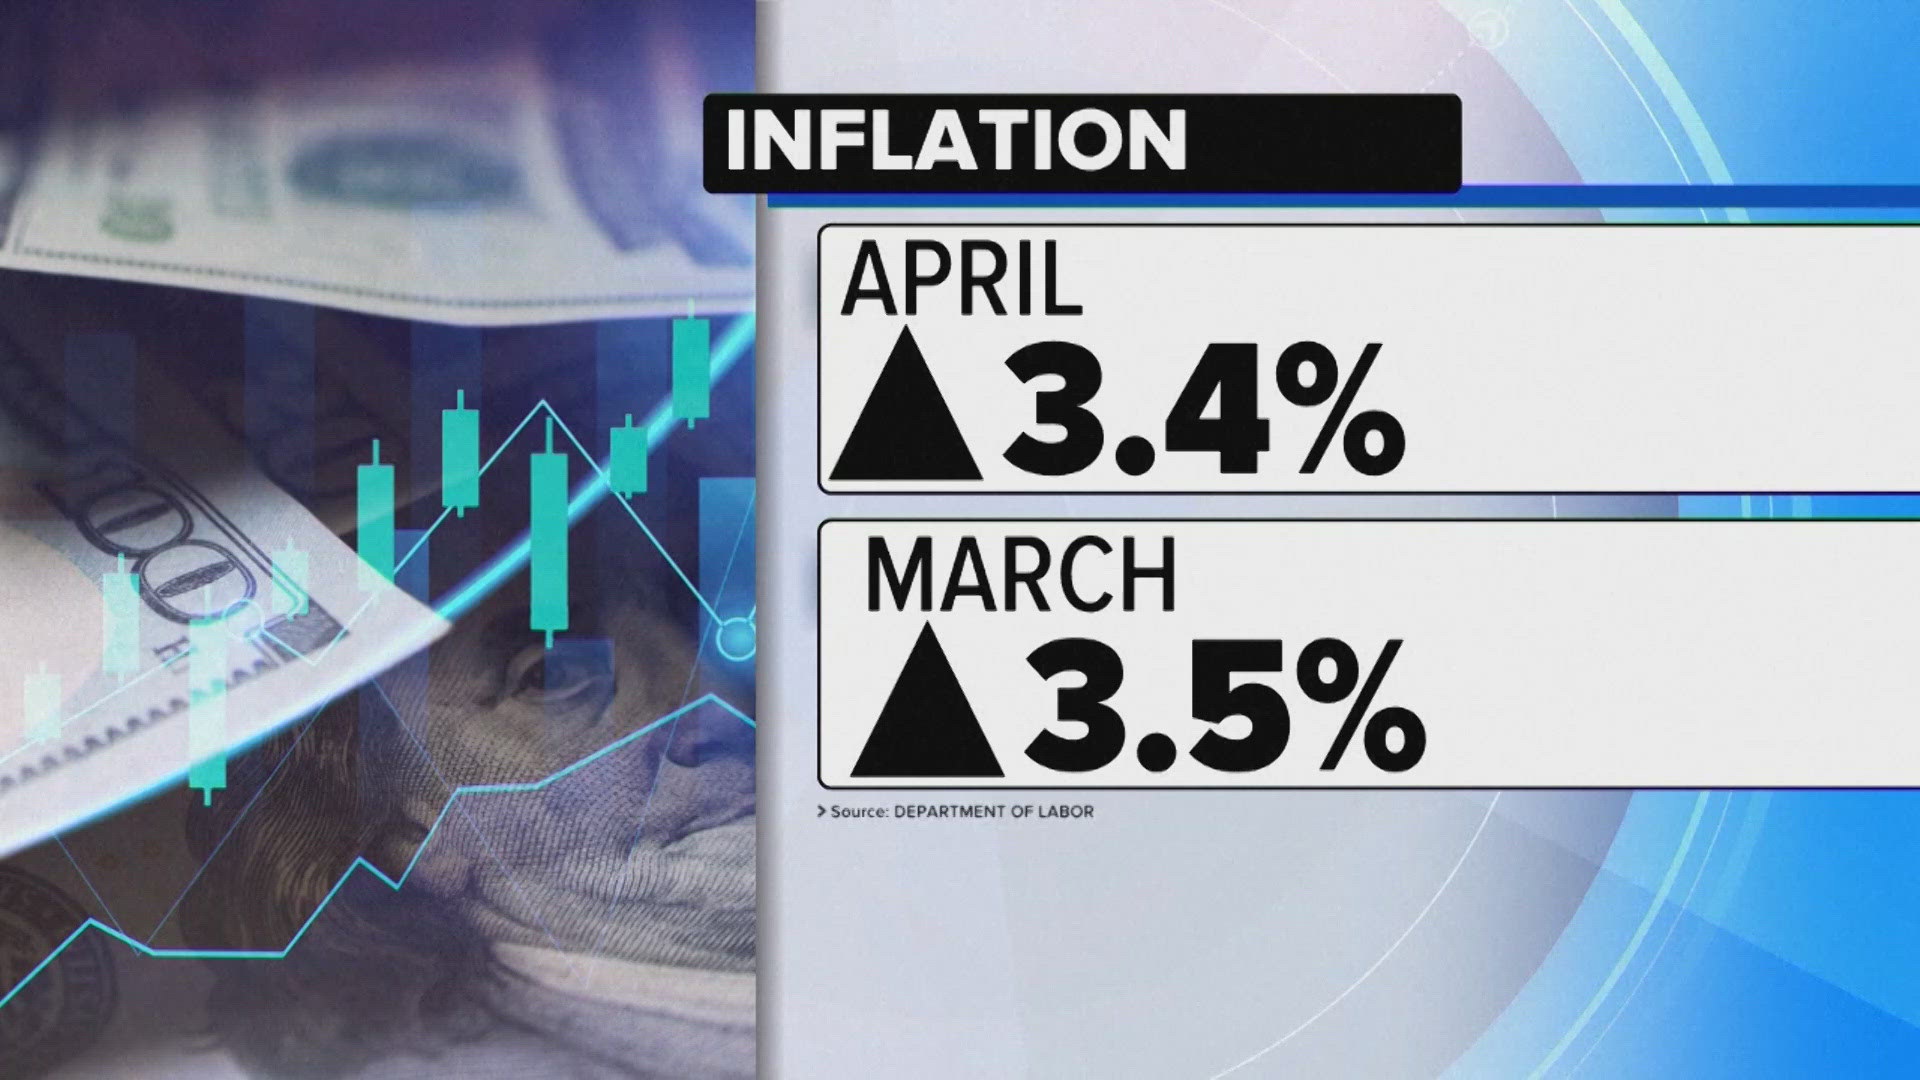 Natalie Haddad has a look at the latest inflation numbers for the U.S.